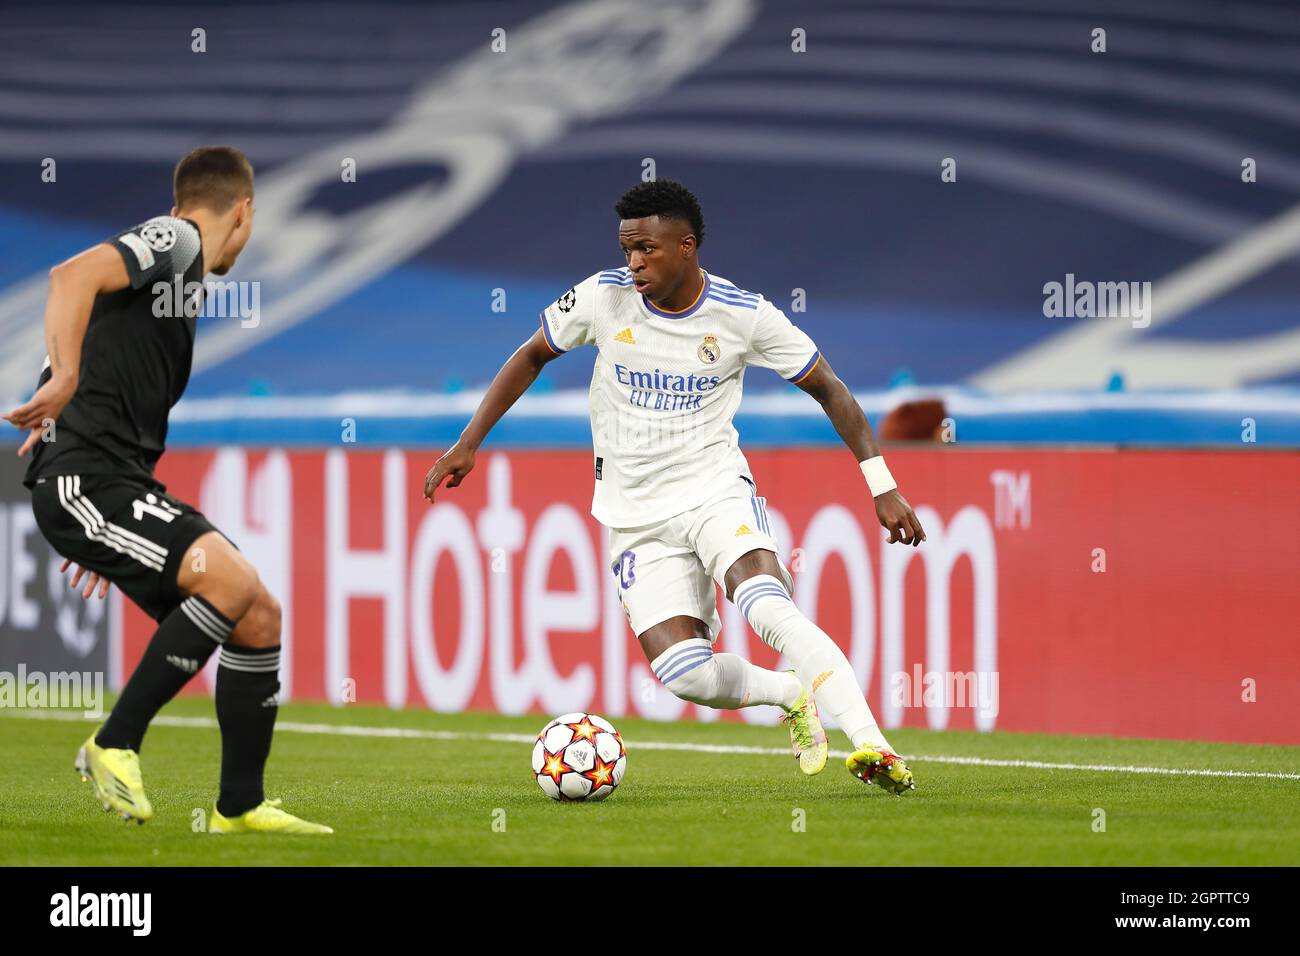 Madrid, Spain. 28th Sep, 2020. Vinicius Junior (Real) Football/Soccer :  UEFA Champions League Group stage Group D match between Real Madrid CF 1-2  FC Sheriff Tiraspol at the Estadio Santiago Bernabeu in